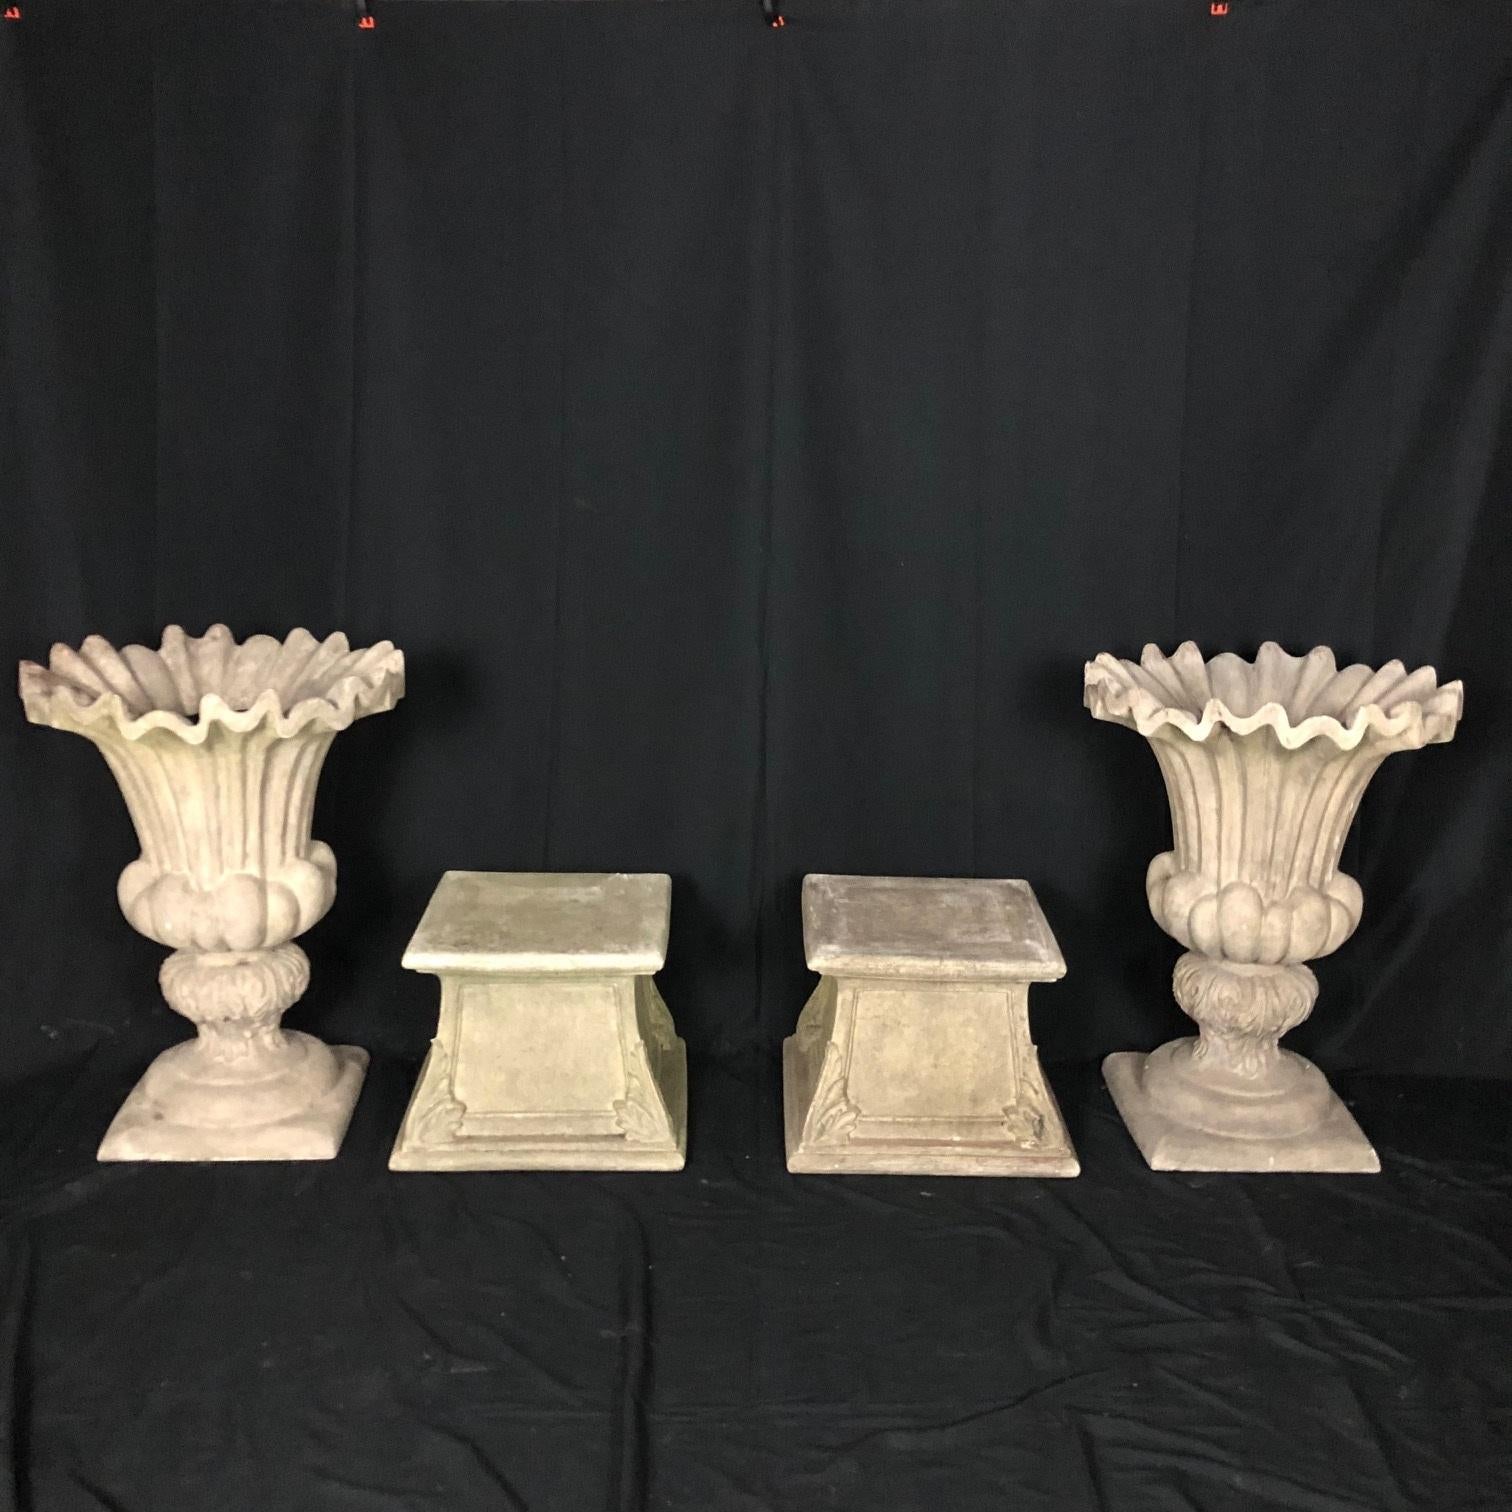 Elegant Pair of Vintage Classical Garden Planter Urns and Bases 6